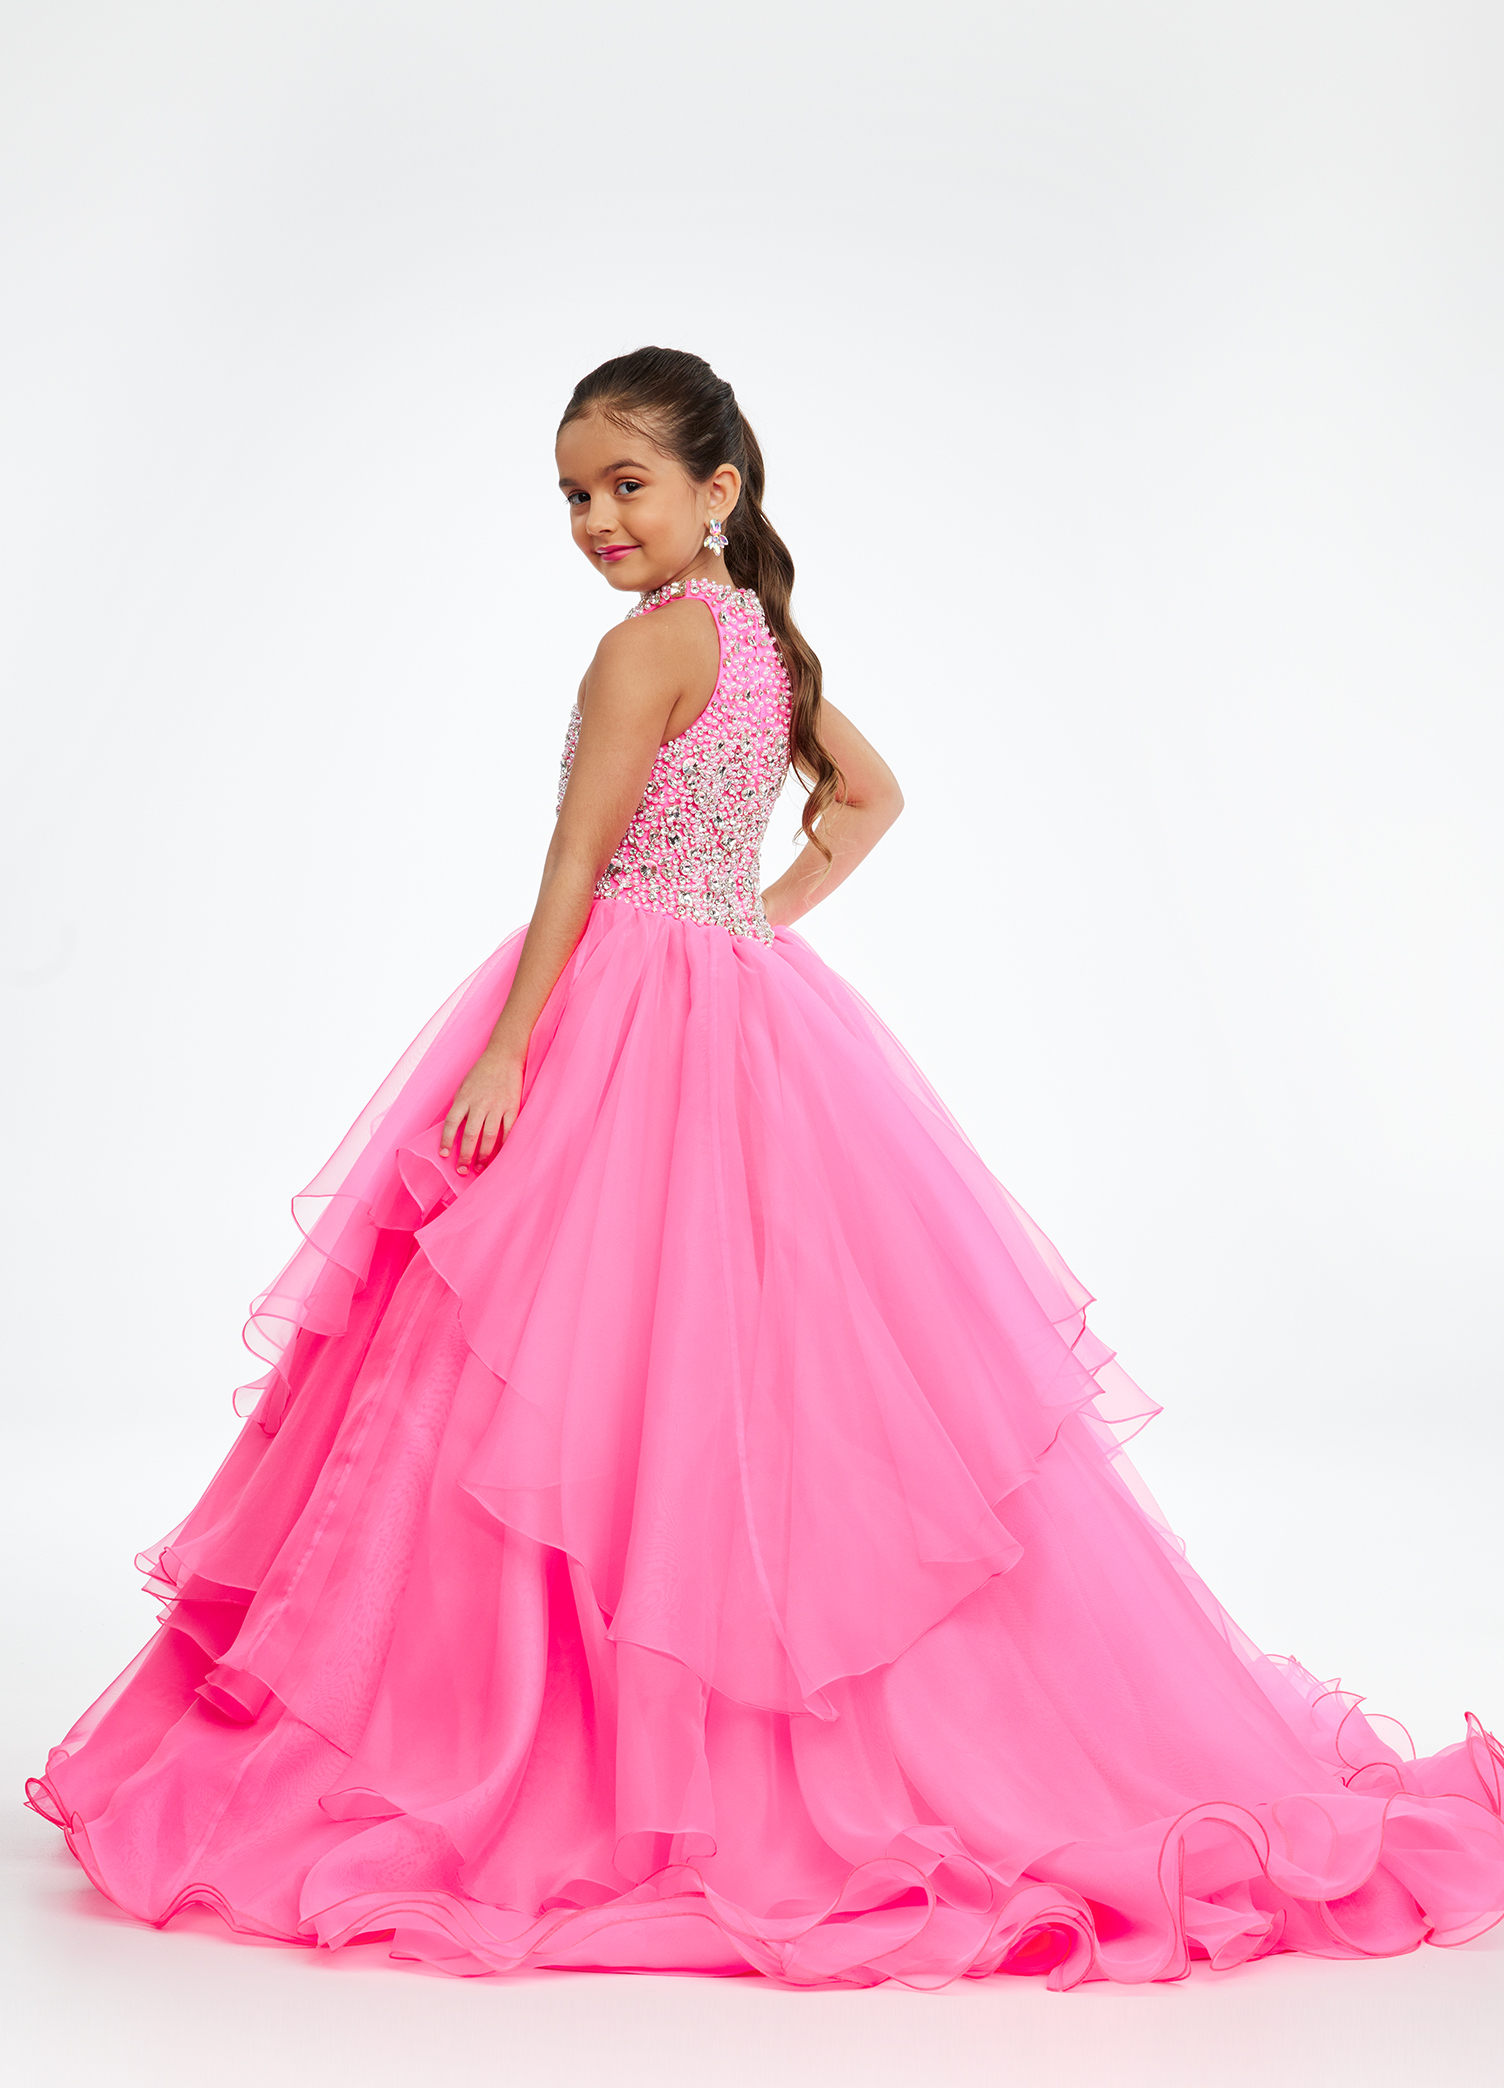 1500 Teen Pageant Dresses Stock Photos Pictures  RoyaltyFree Images   iStock